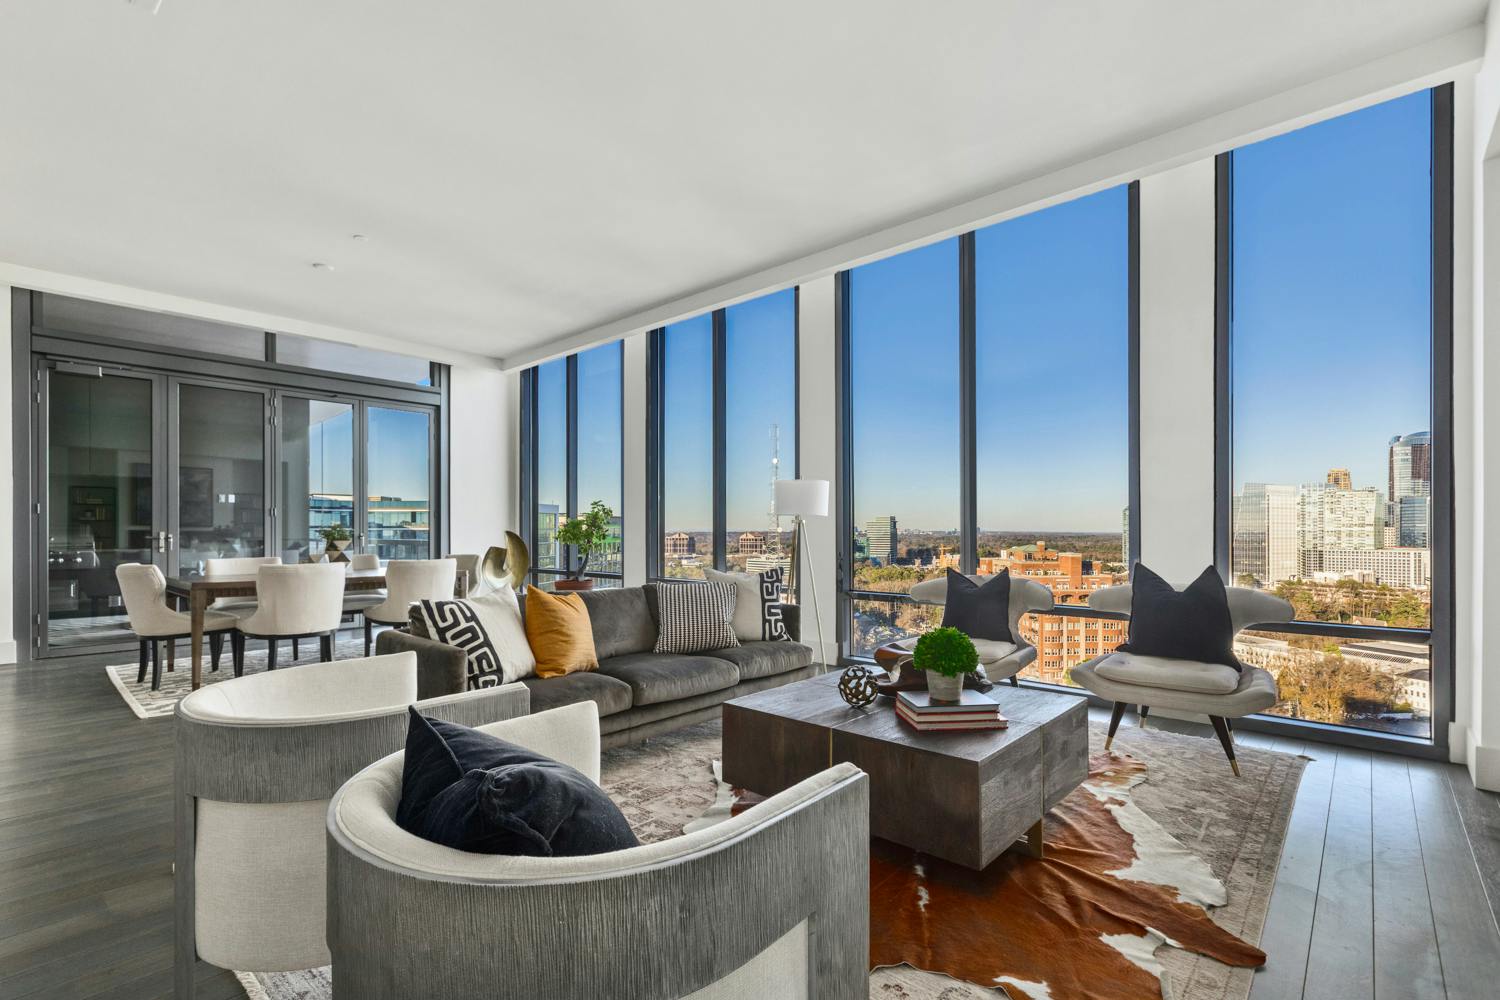 luxury condo with NanaWall opening glass walls onto terrace